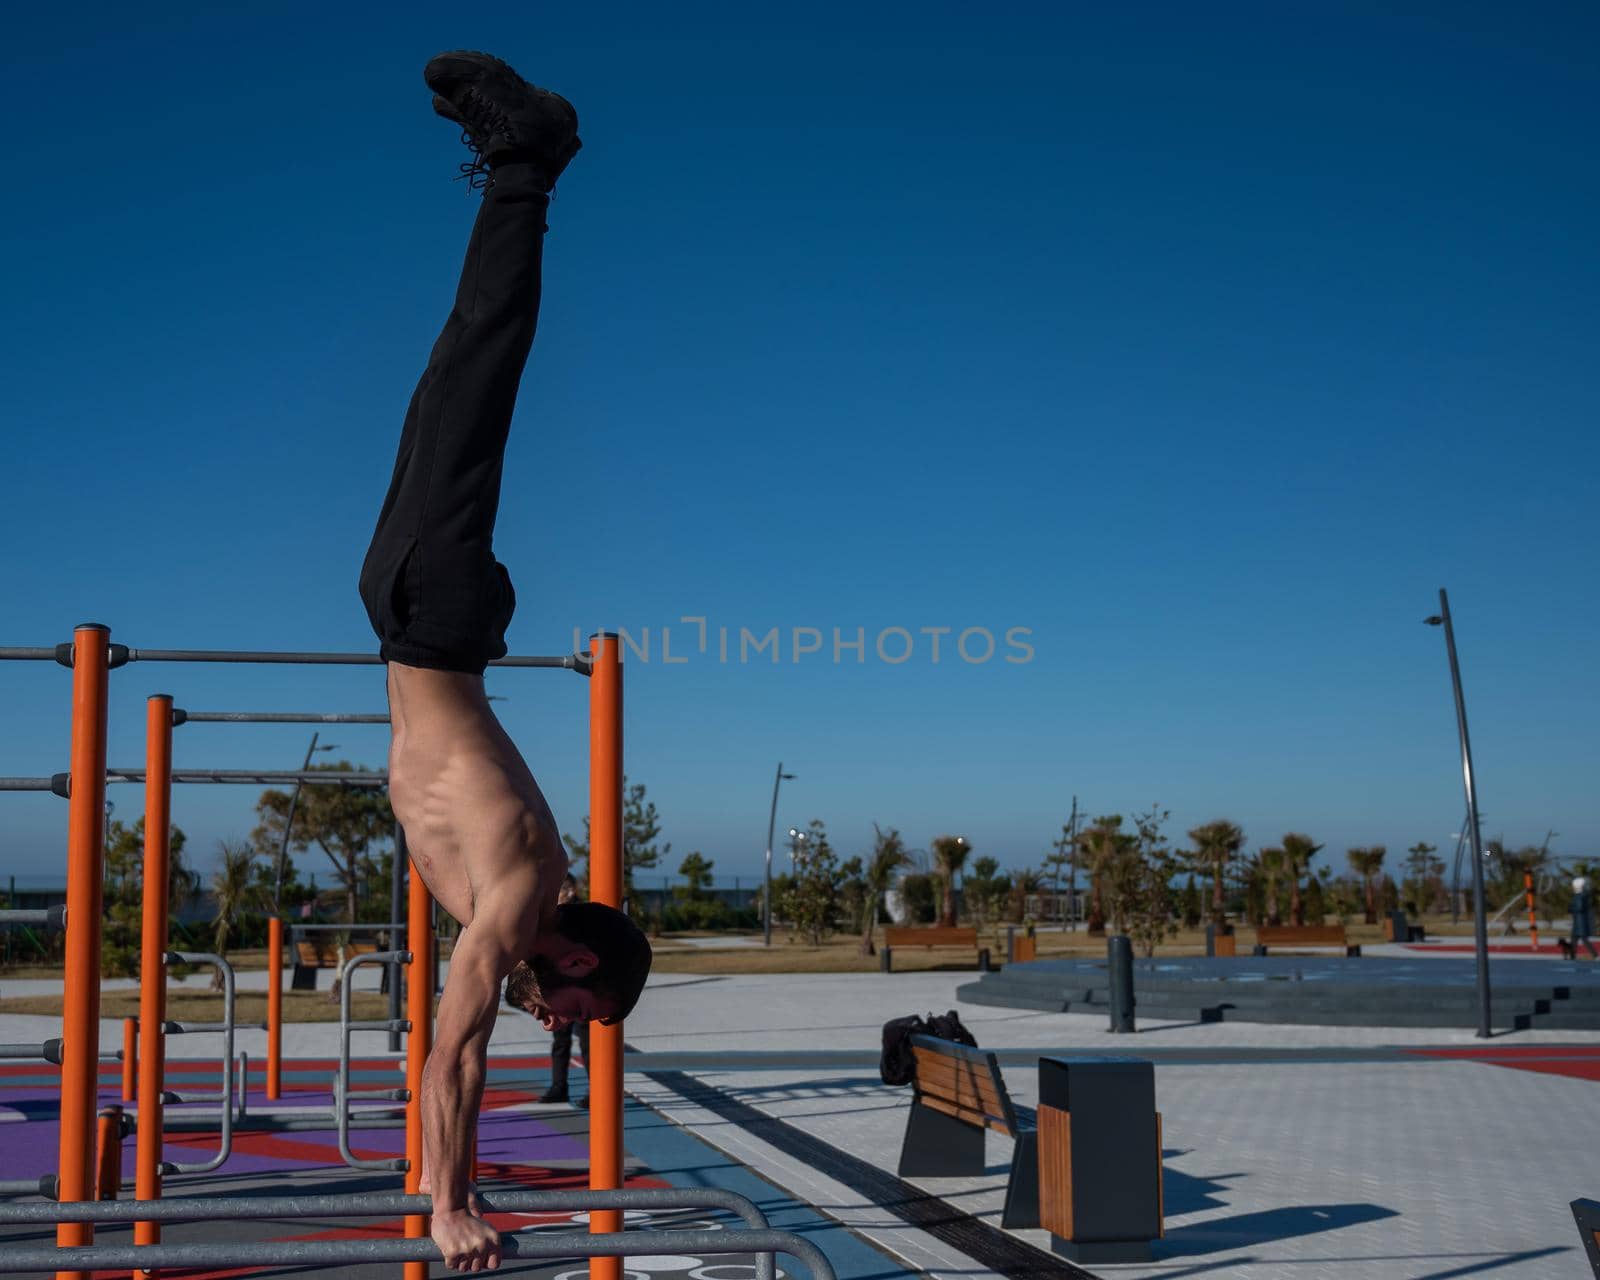 Shirtless man doing handstand on parallel bars at sports ground. by mrwed54